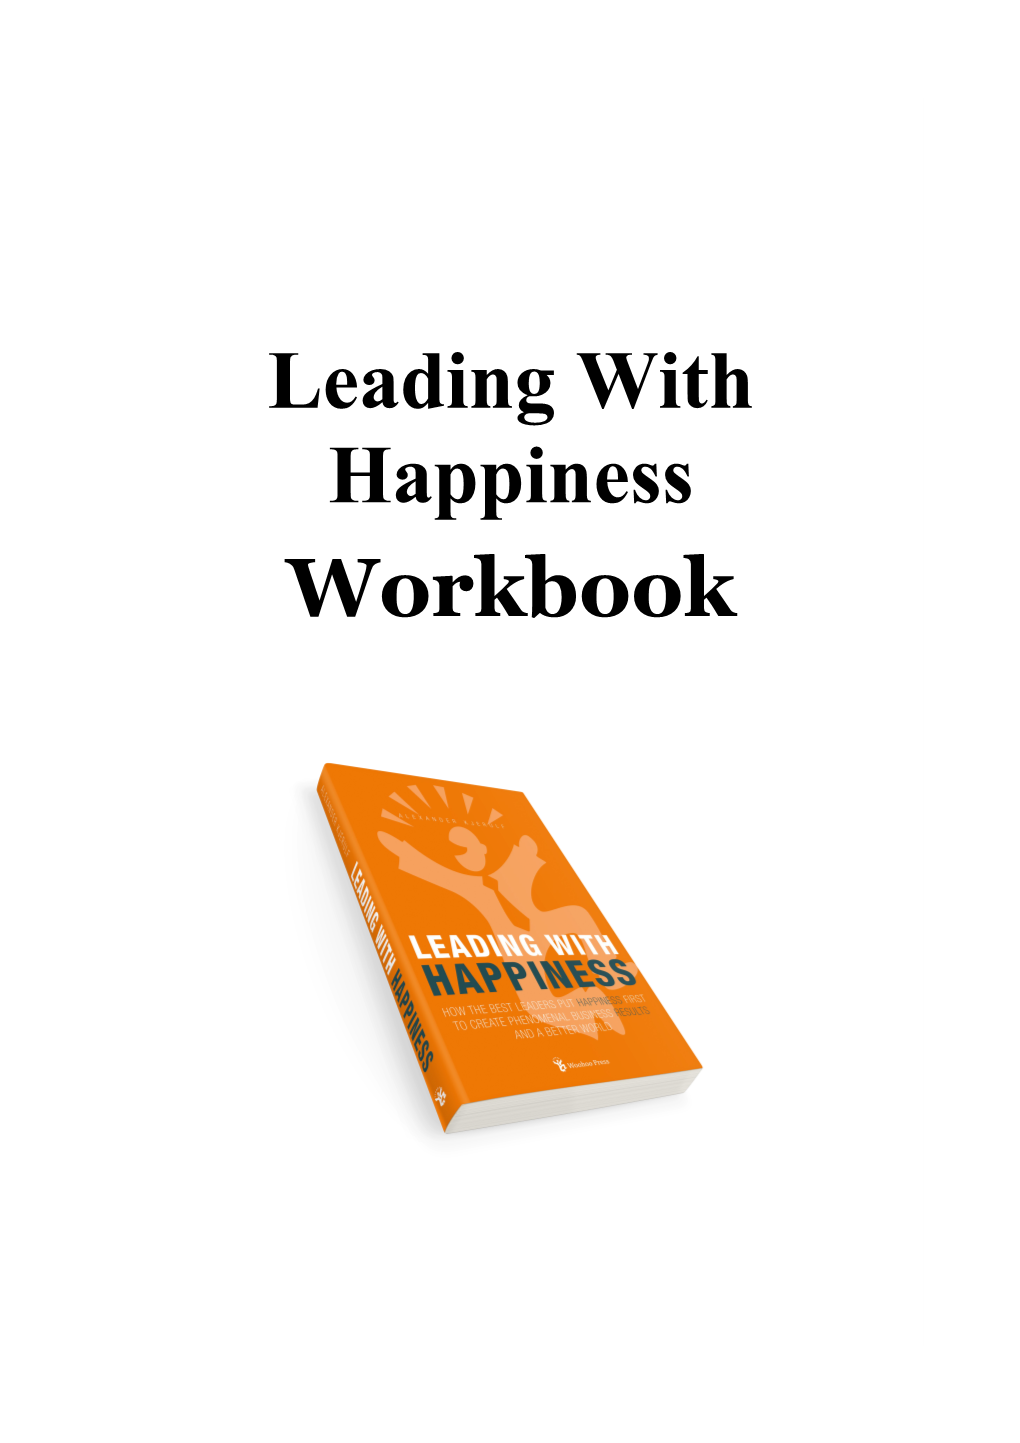 Leading with Happiness